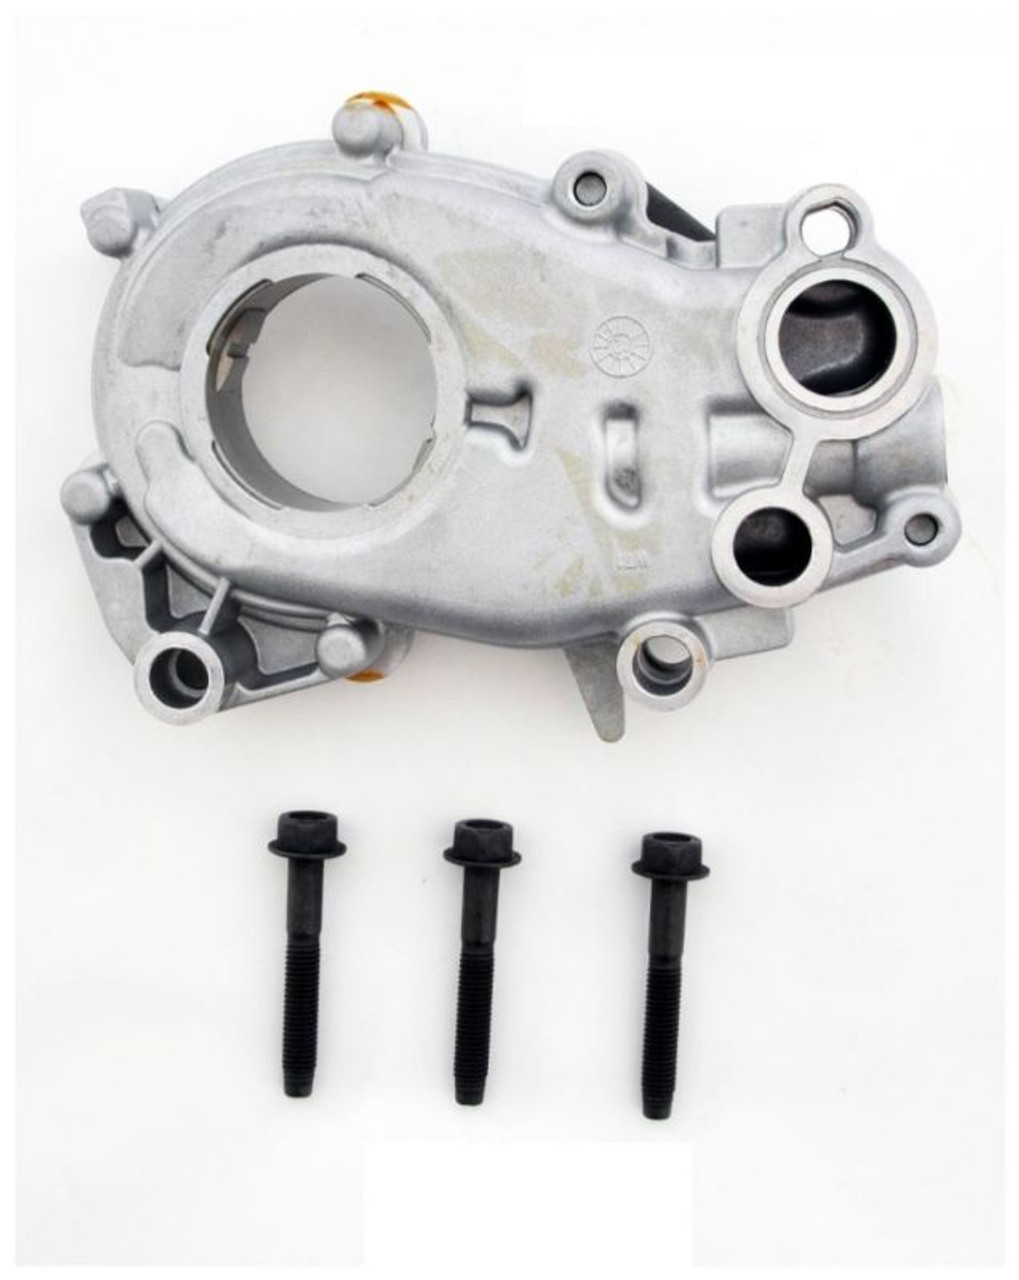 2014 Cadillac CTS 3.0L Engine Oil Pump EP353 -82